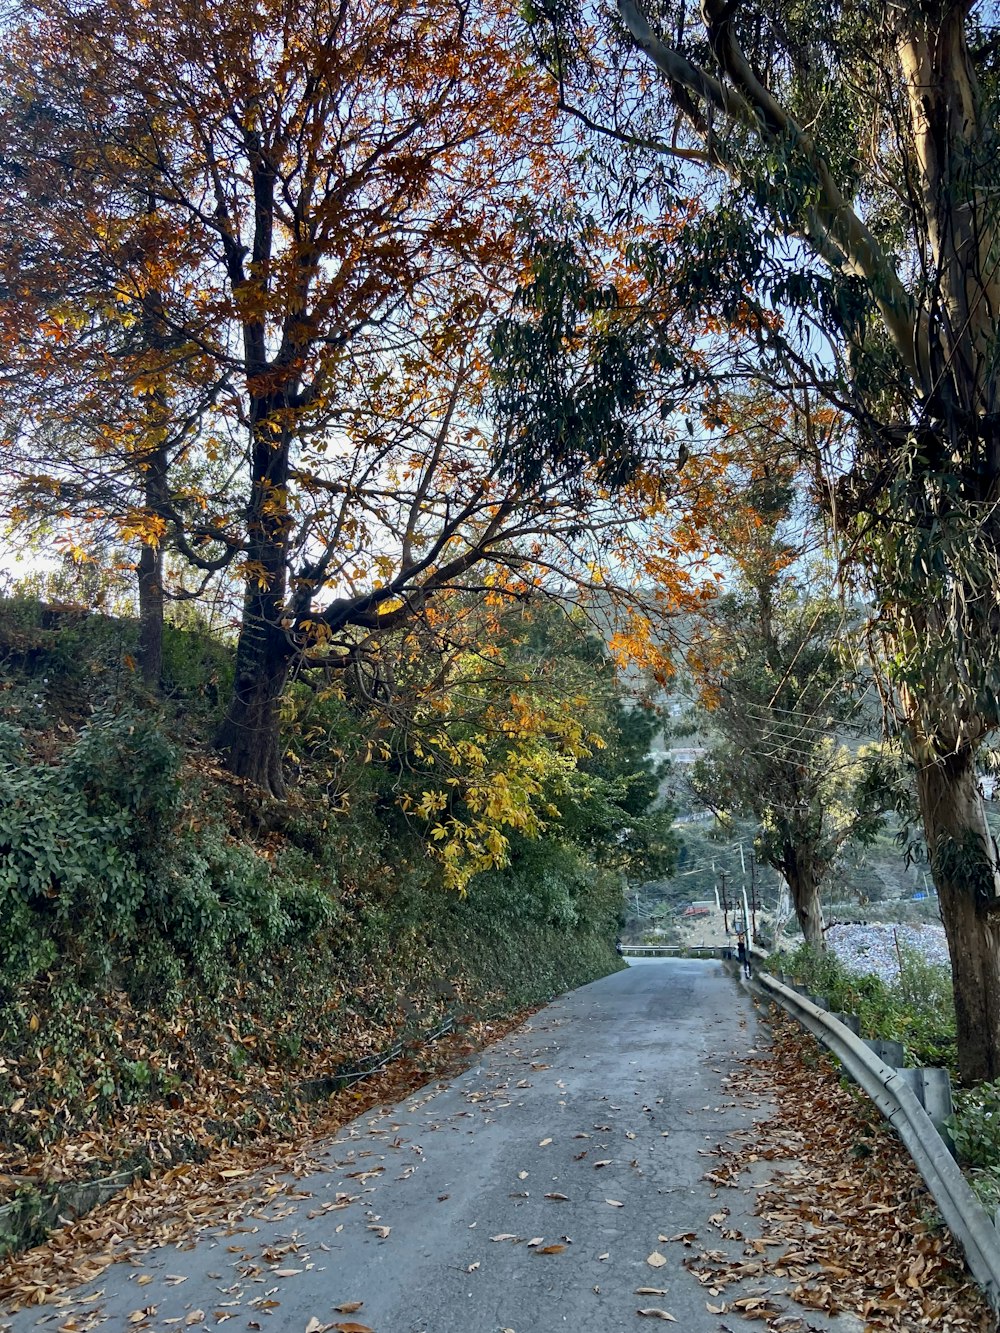 a paved road surrounded by trees with leaves on the ground